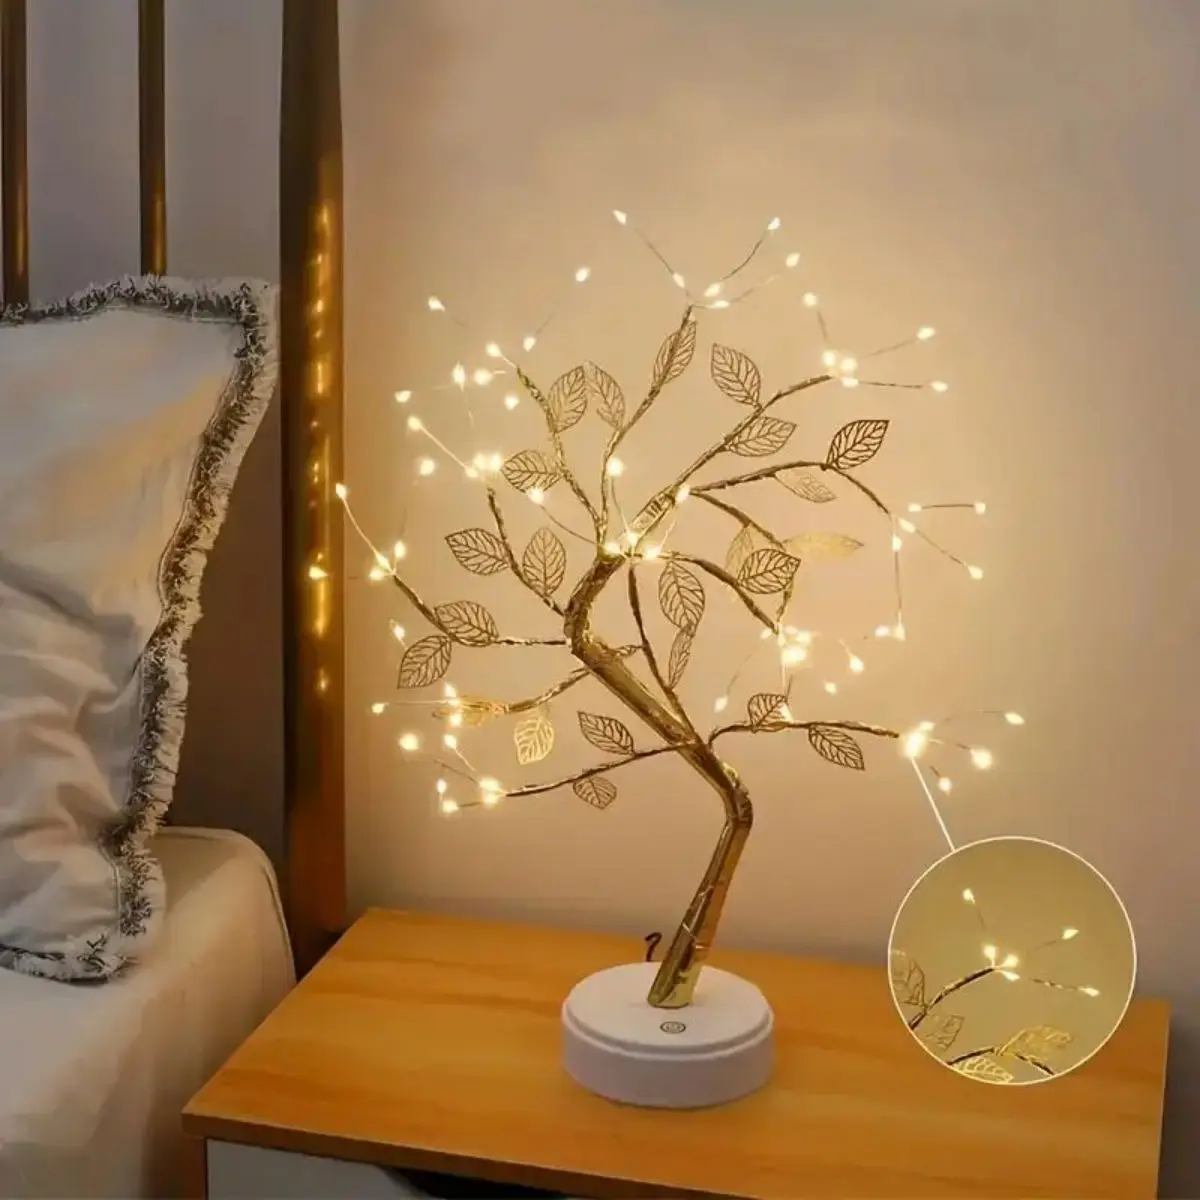 1pc Golden Leaf Tree Lamp, 72 LED Copper Wire String Lights, Touch Switch, - $12.32